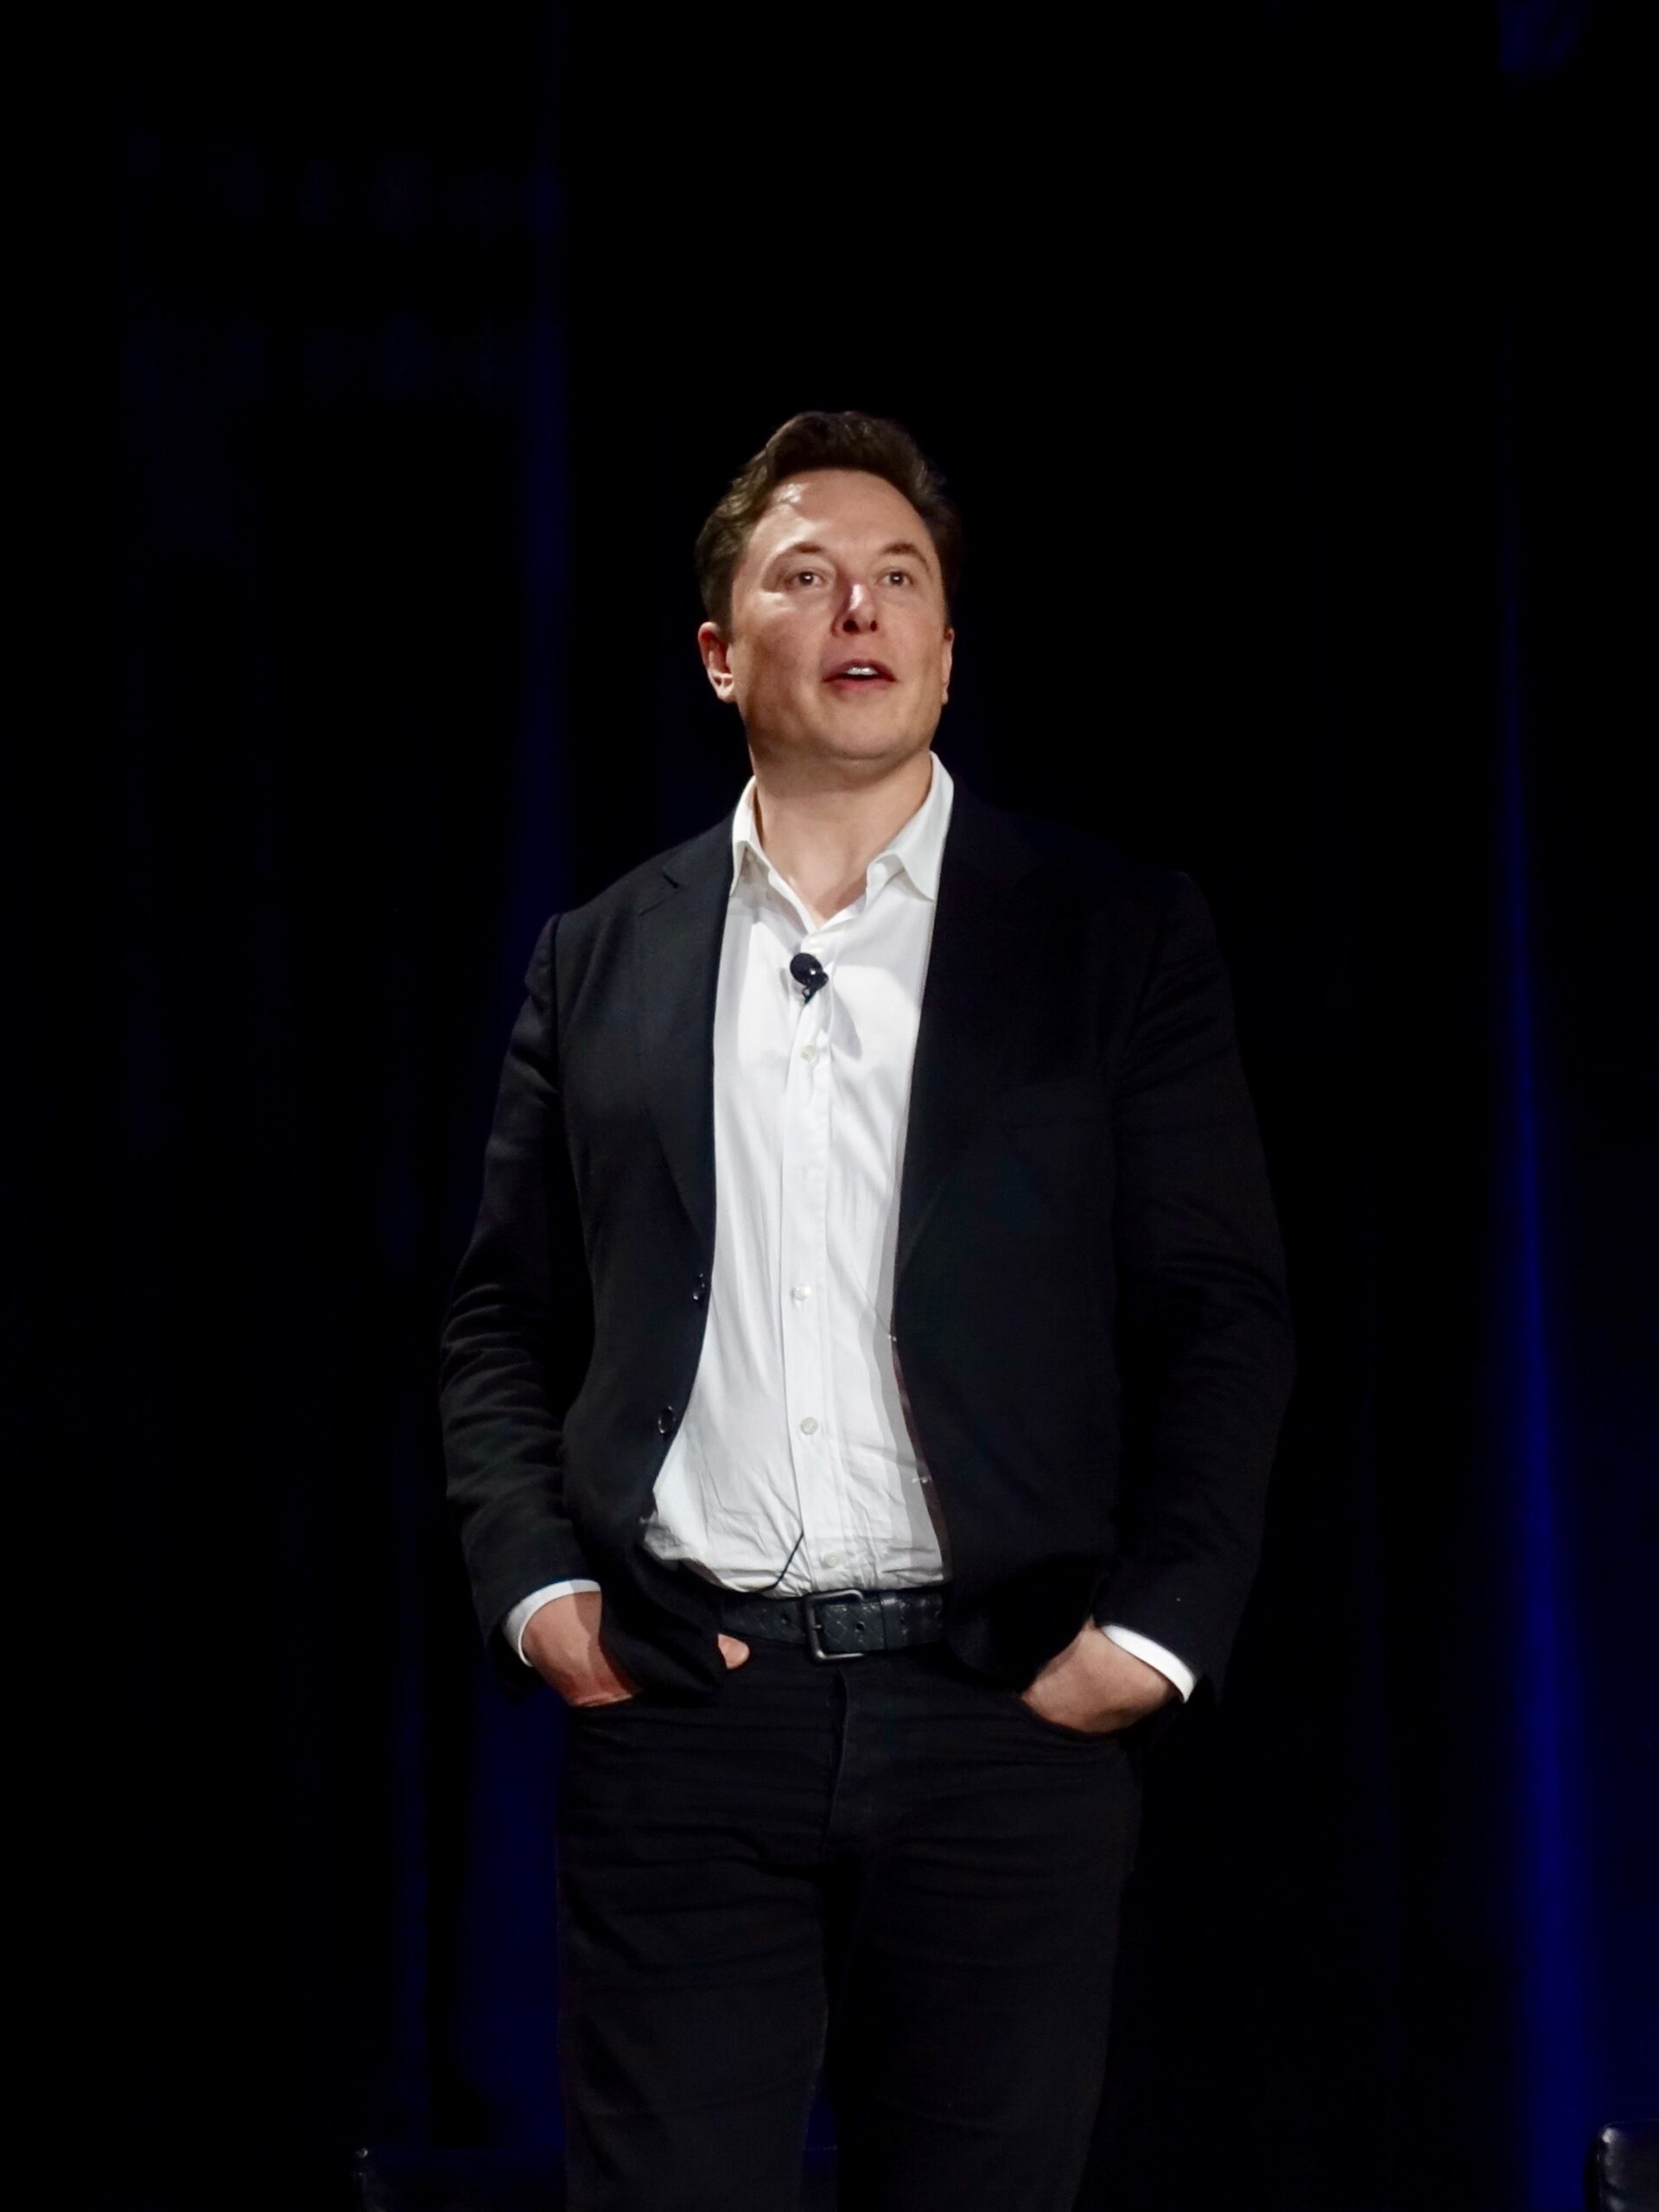 Elon Musk Twitter CEO at Stage